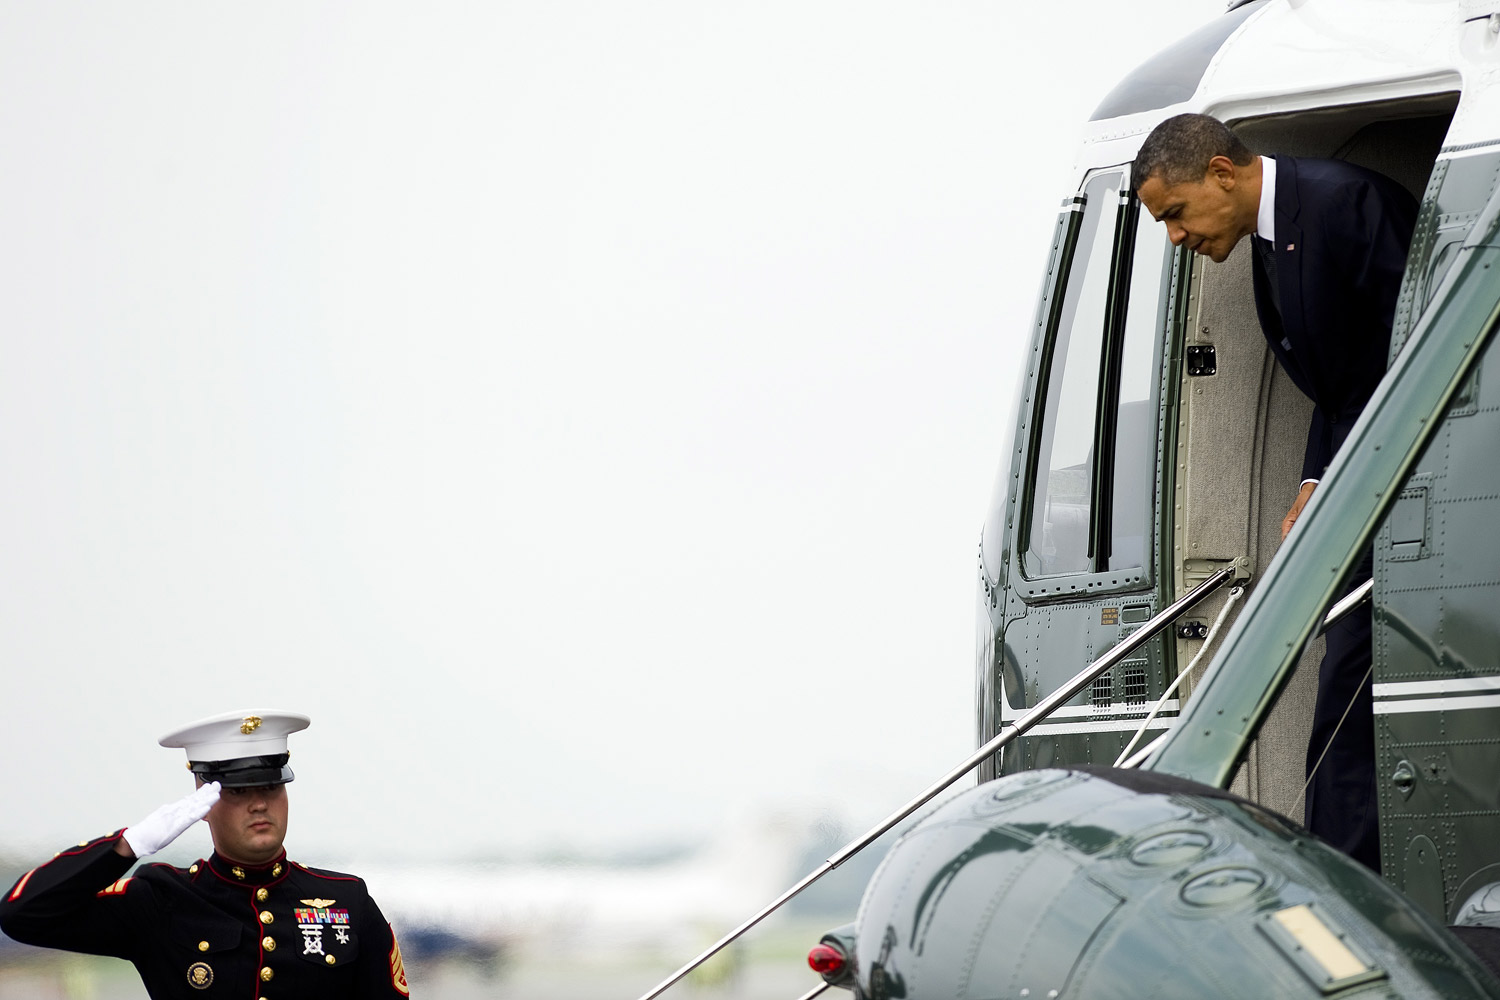 August 9, 2011. US President Barack Obama is saluted as he arrives at Dover Air Force Base where he will privately meet with families of the 30 Americans that died in a helicopter crash in Afghanistan.